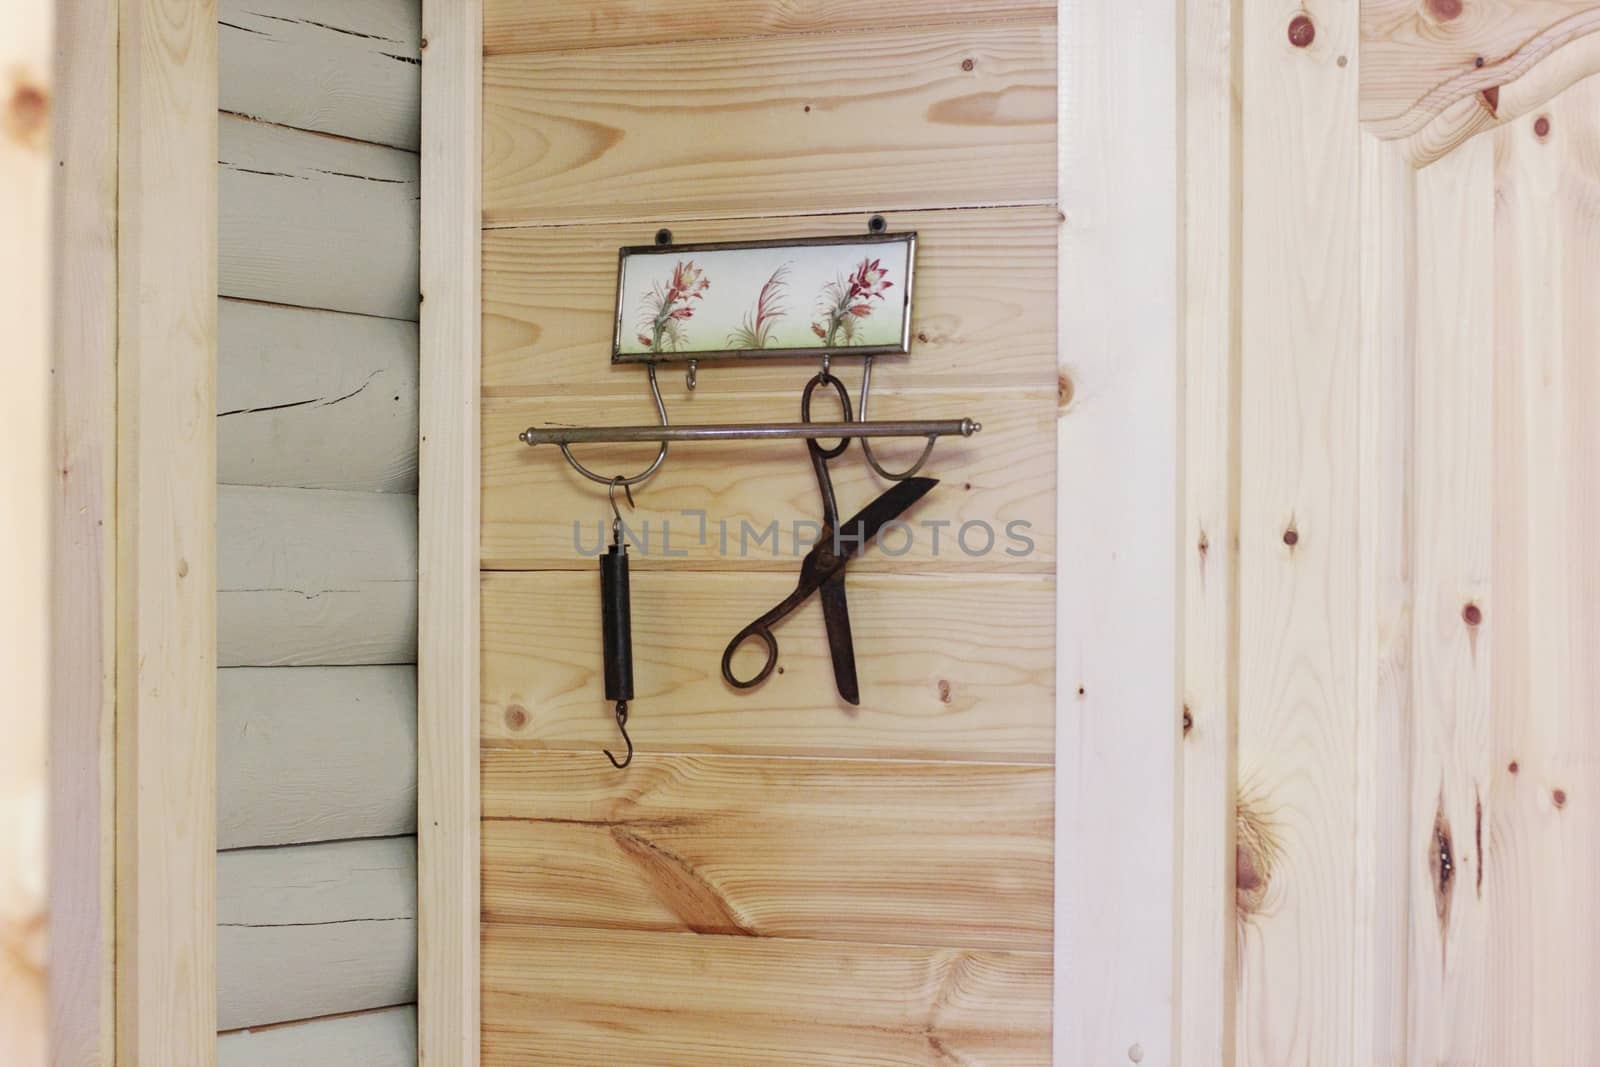 Vintage composition on the background of a wooden wall. Hanger, scissors, scales